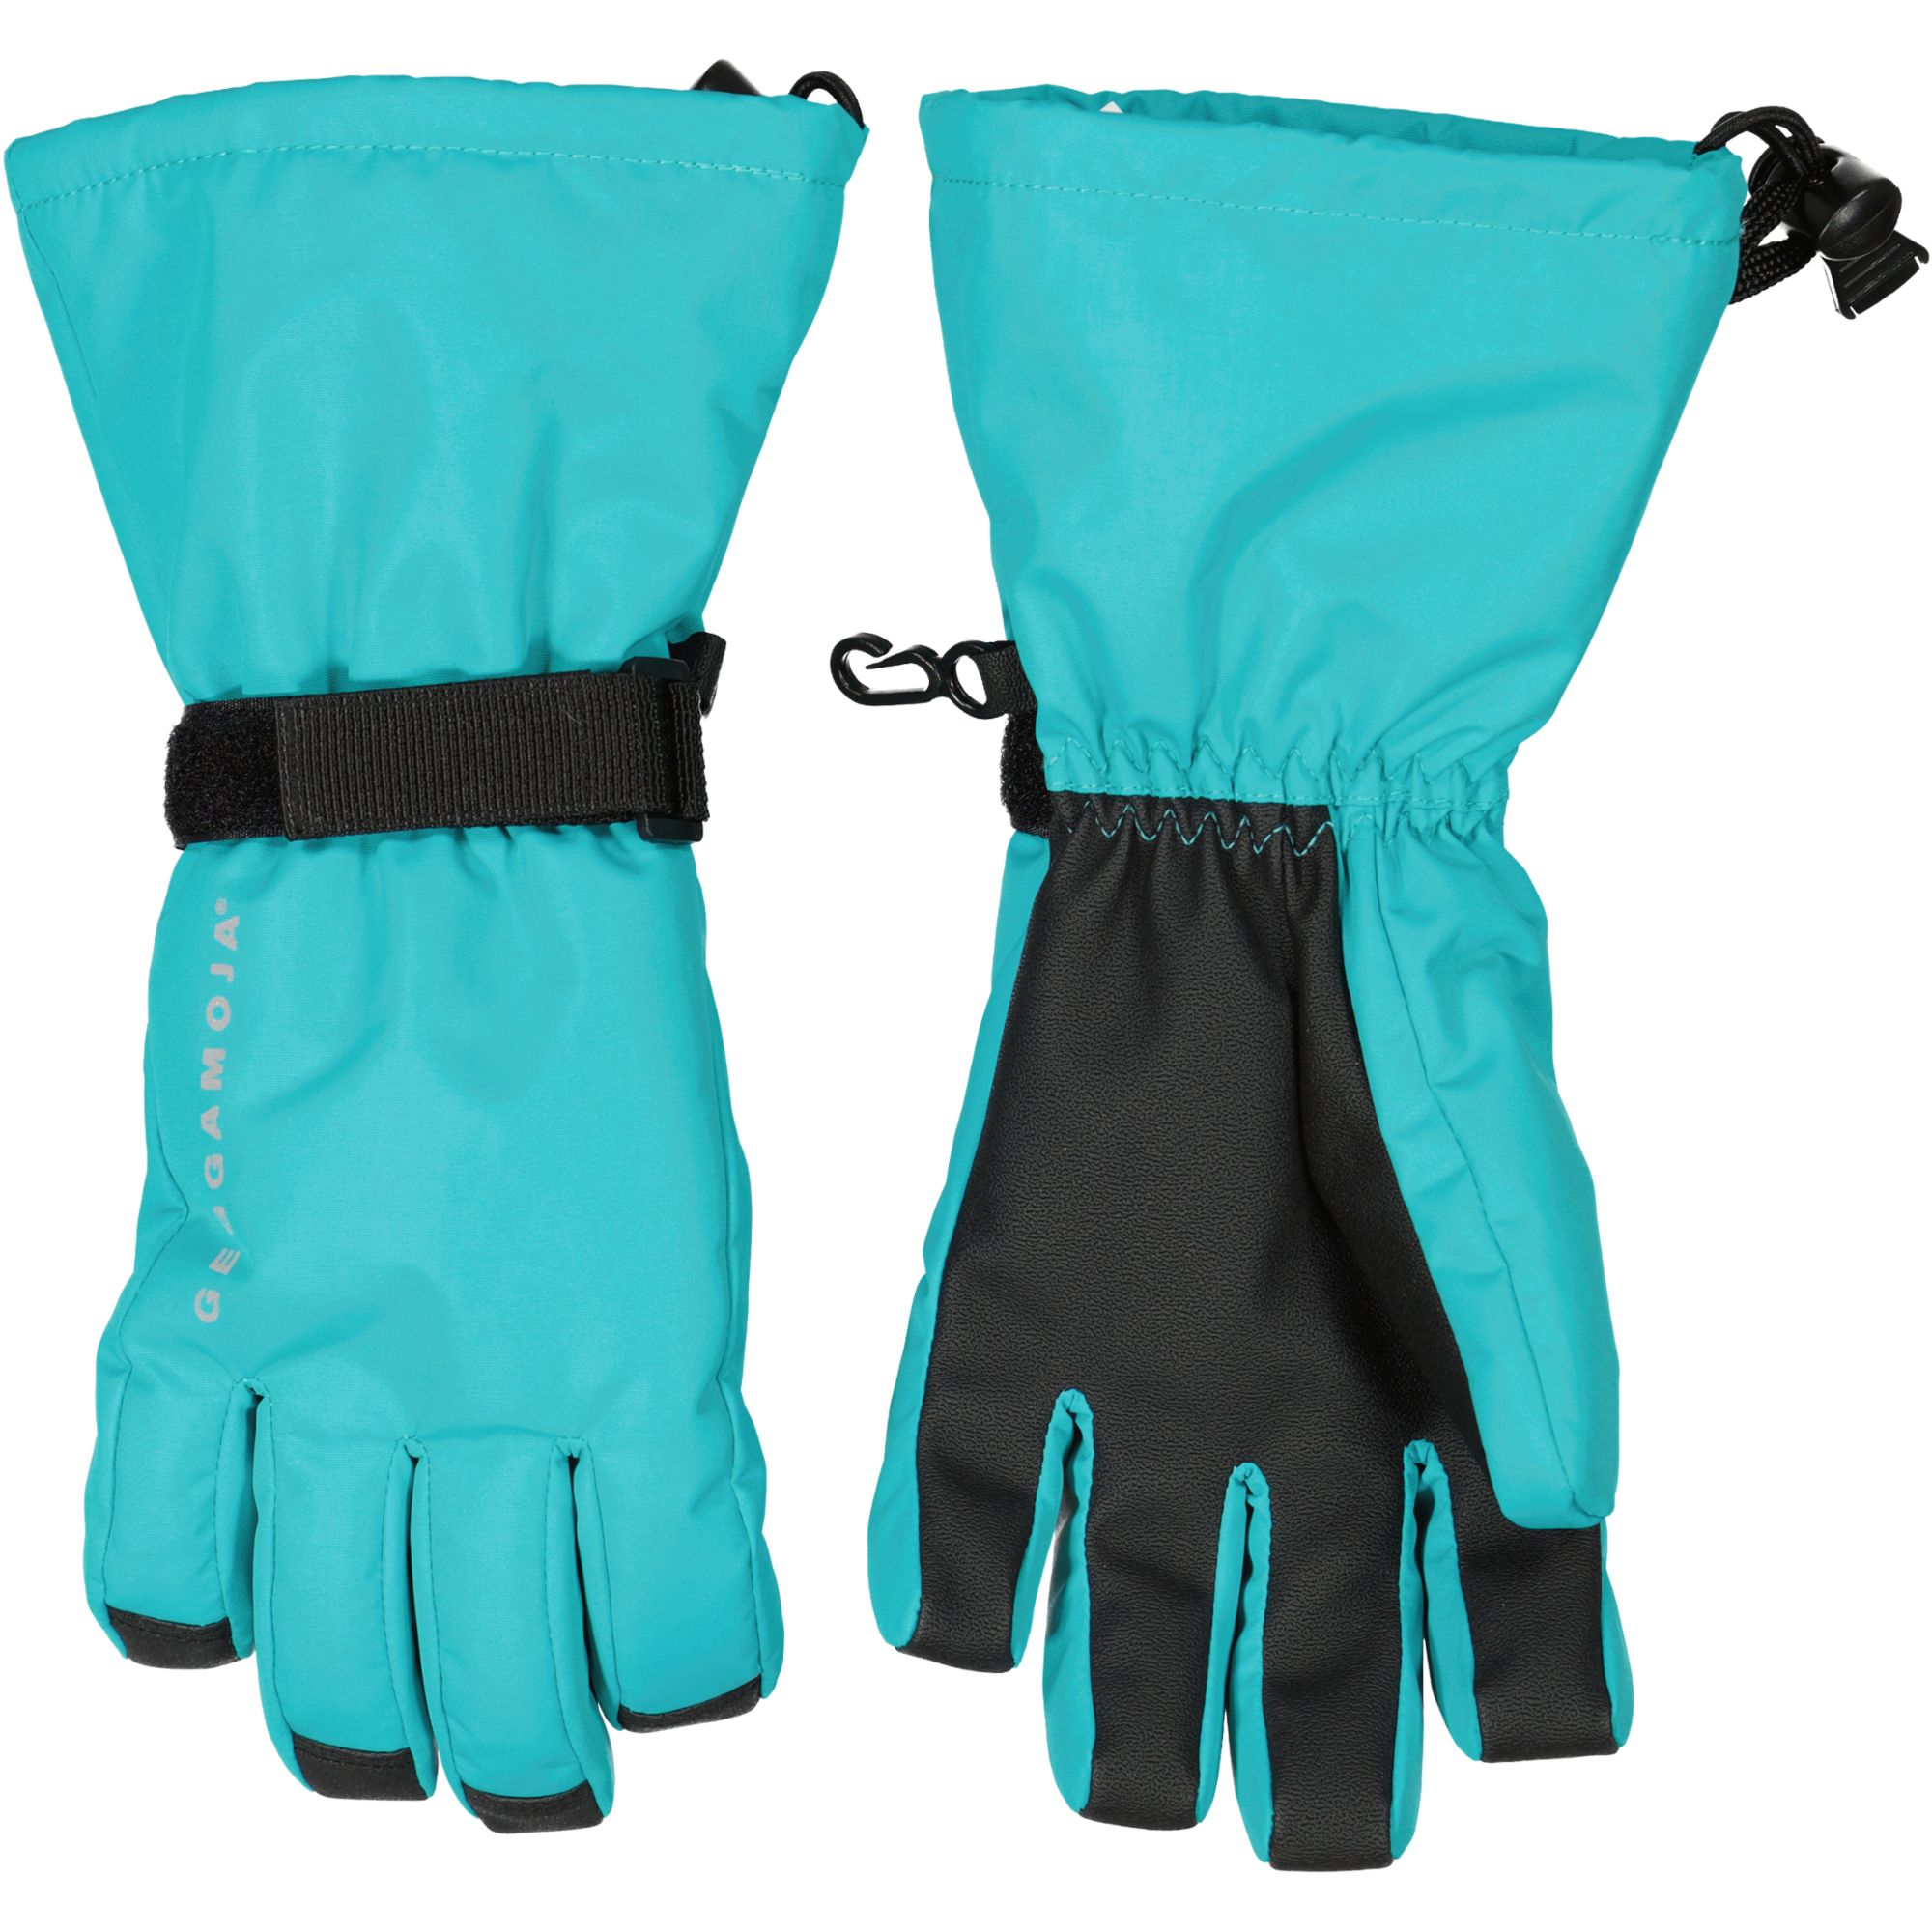 Winter gloves Turquoise